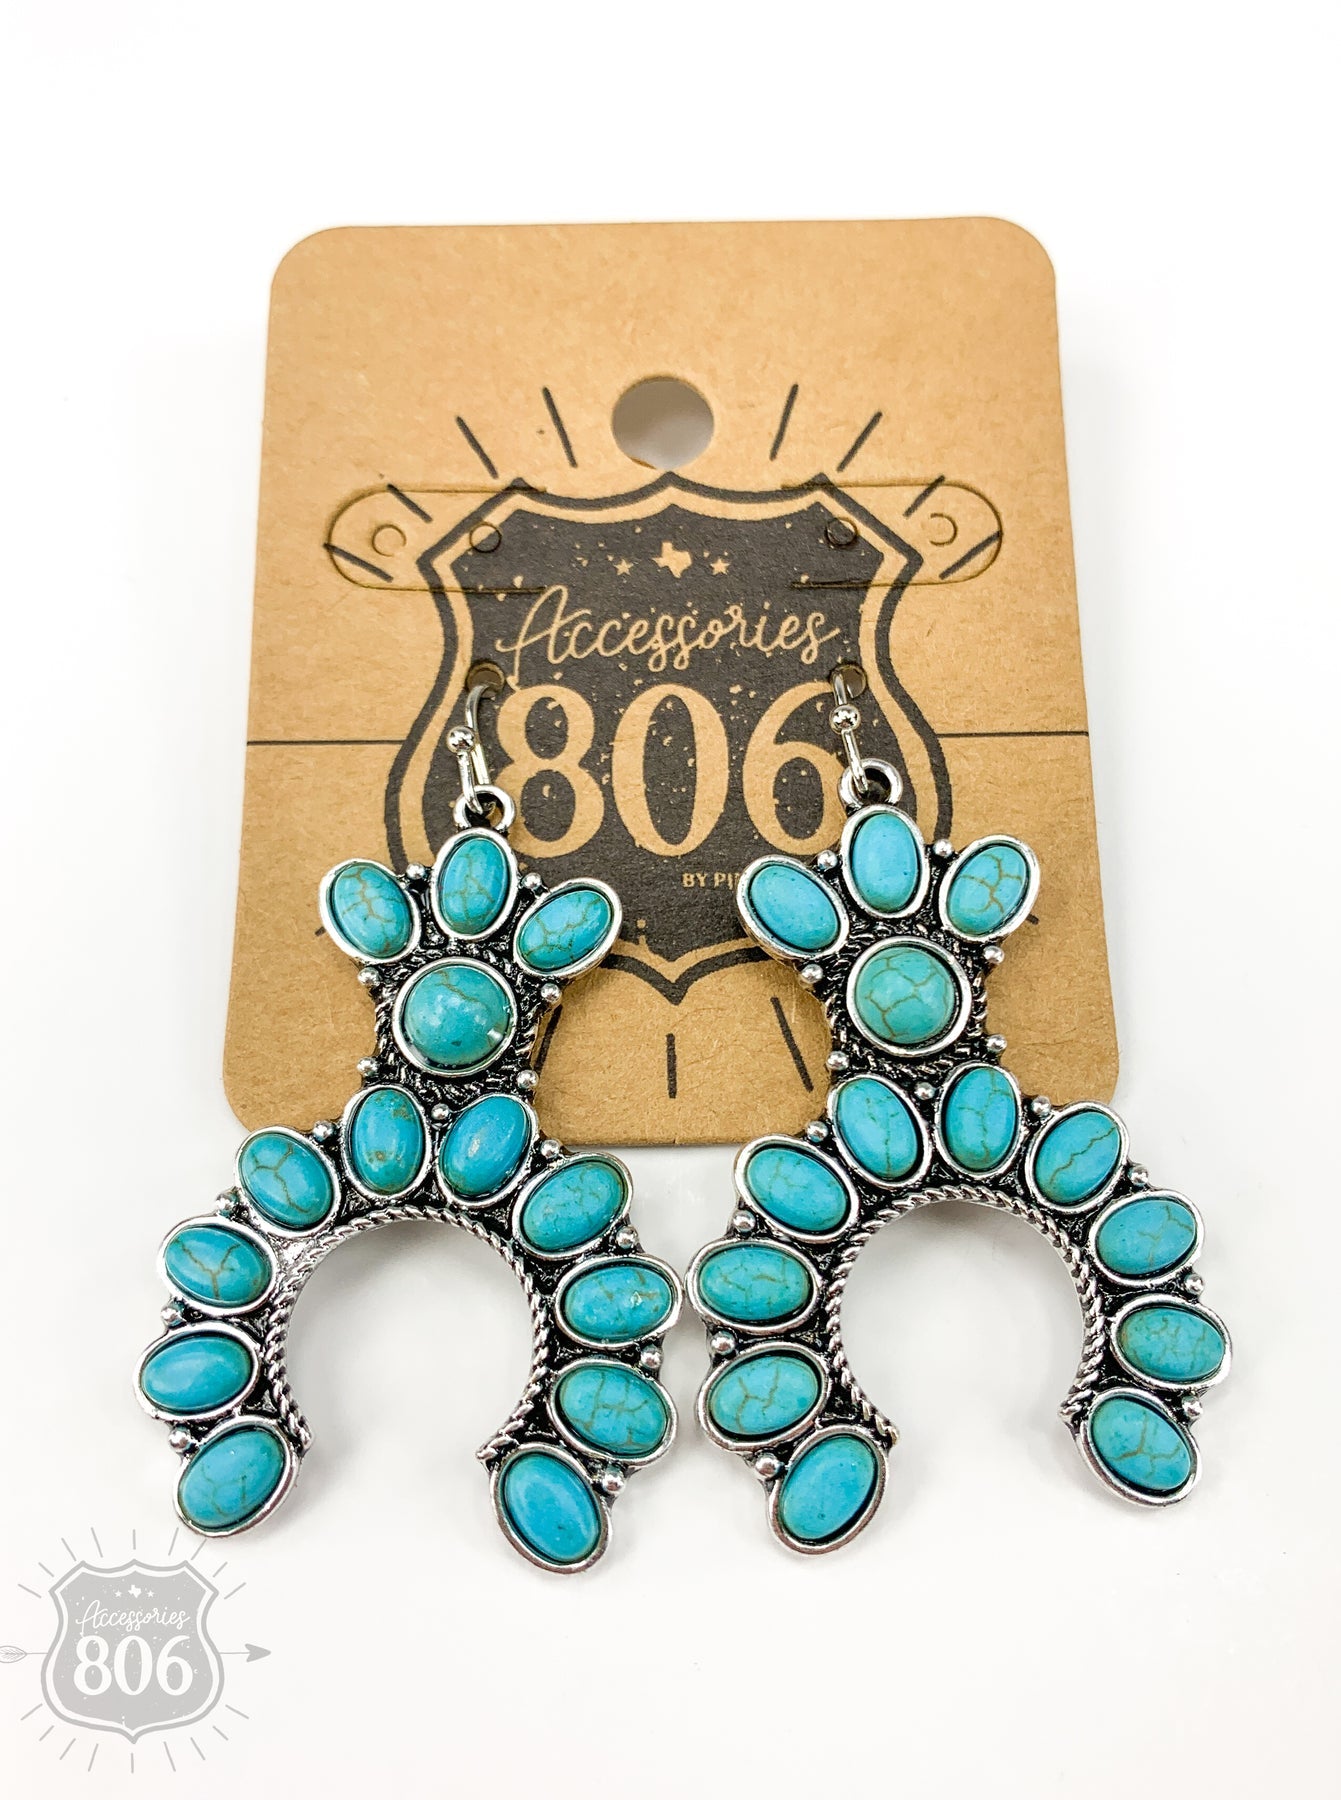 Deluxe Turquoise Squash Blossom Earrings - Cowgirl Jewelry